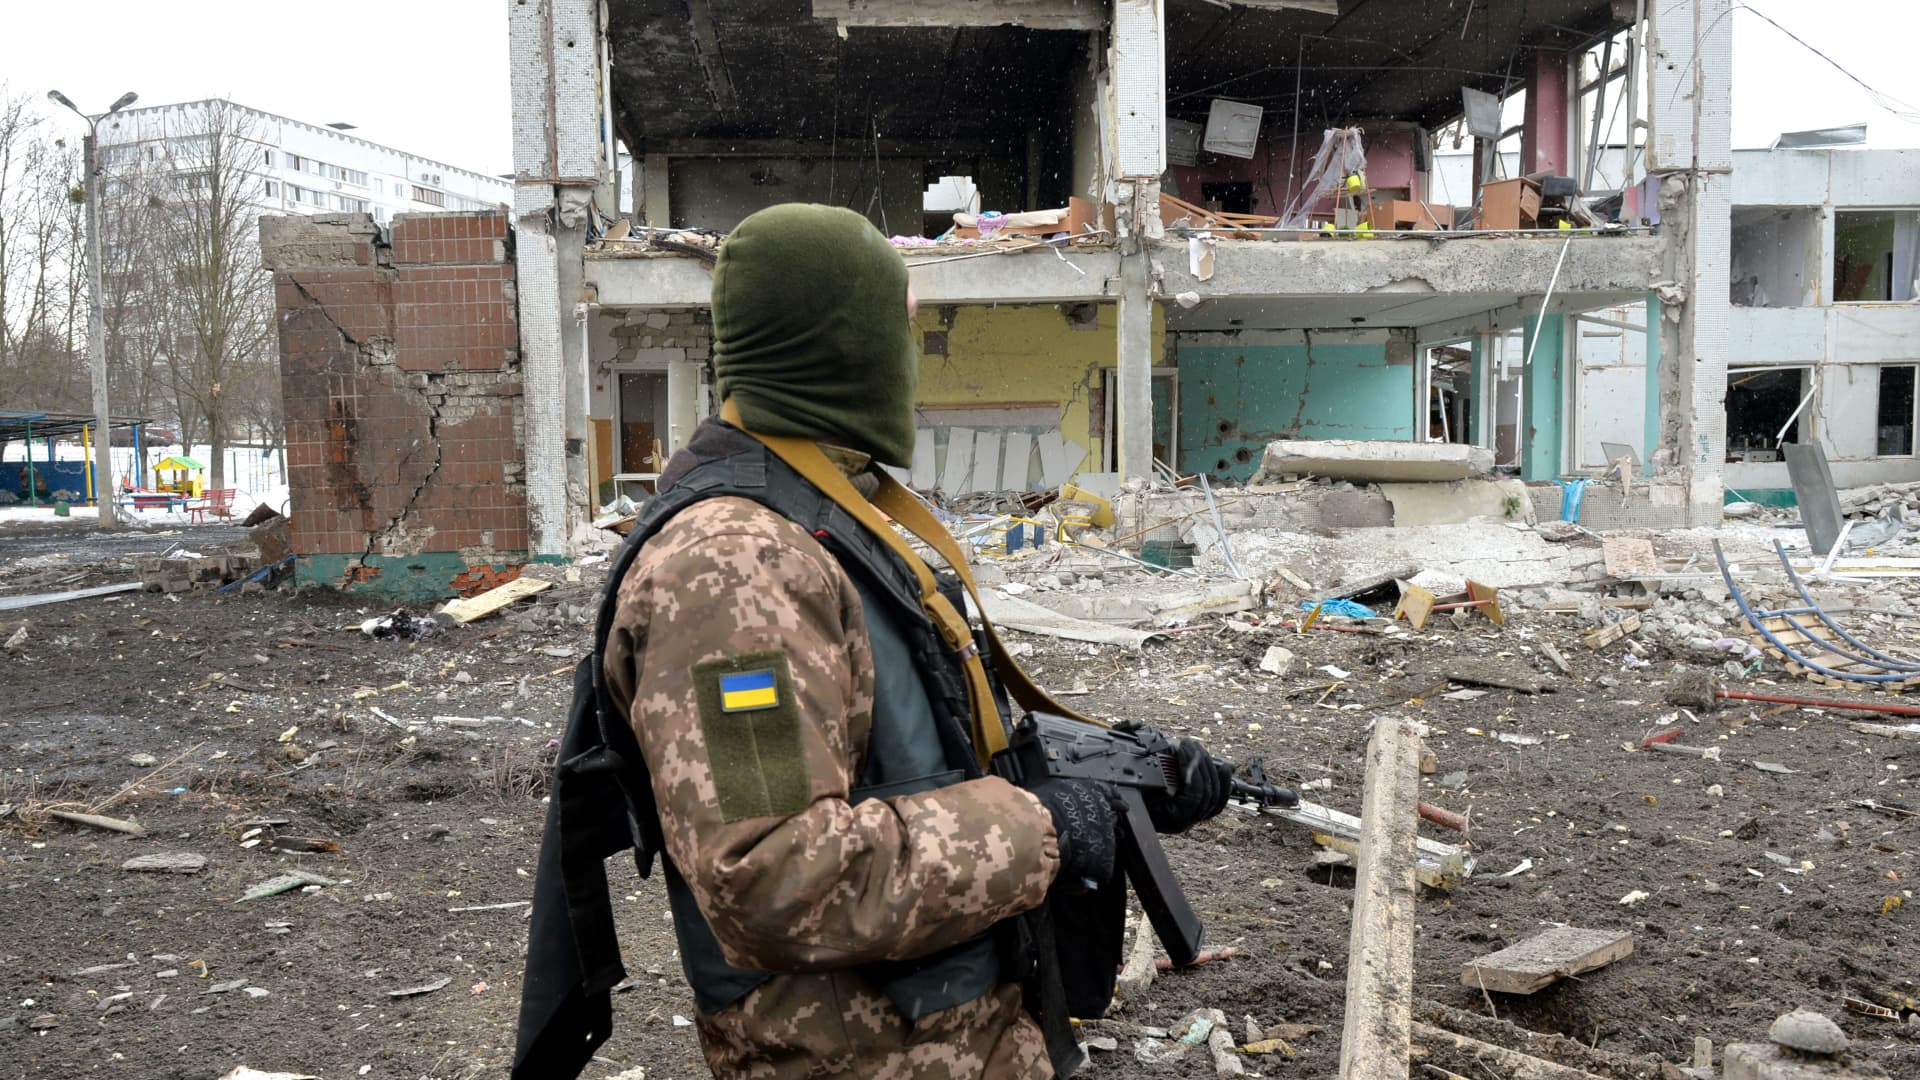 A member of the Ukrainian Territorial Defence Forces looks at destructions following a shelling in Ukraine's second-biggest city of Kharkiv on March 8, 2022.